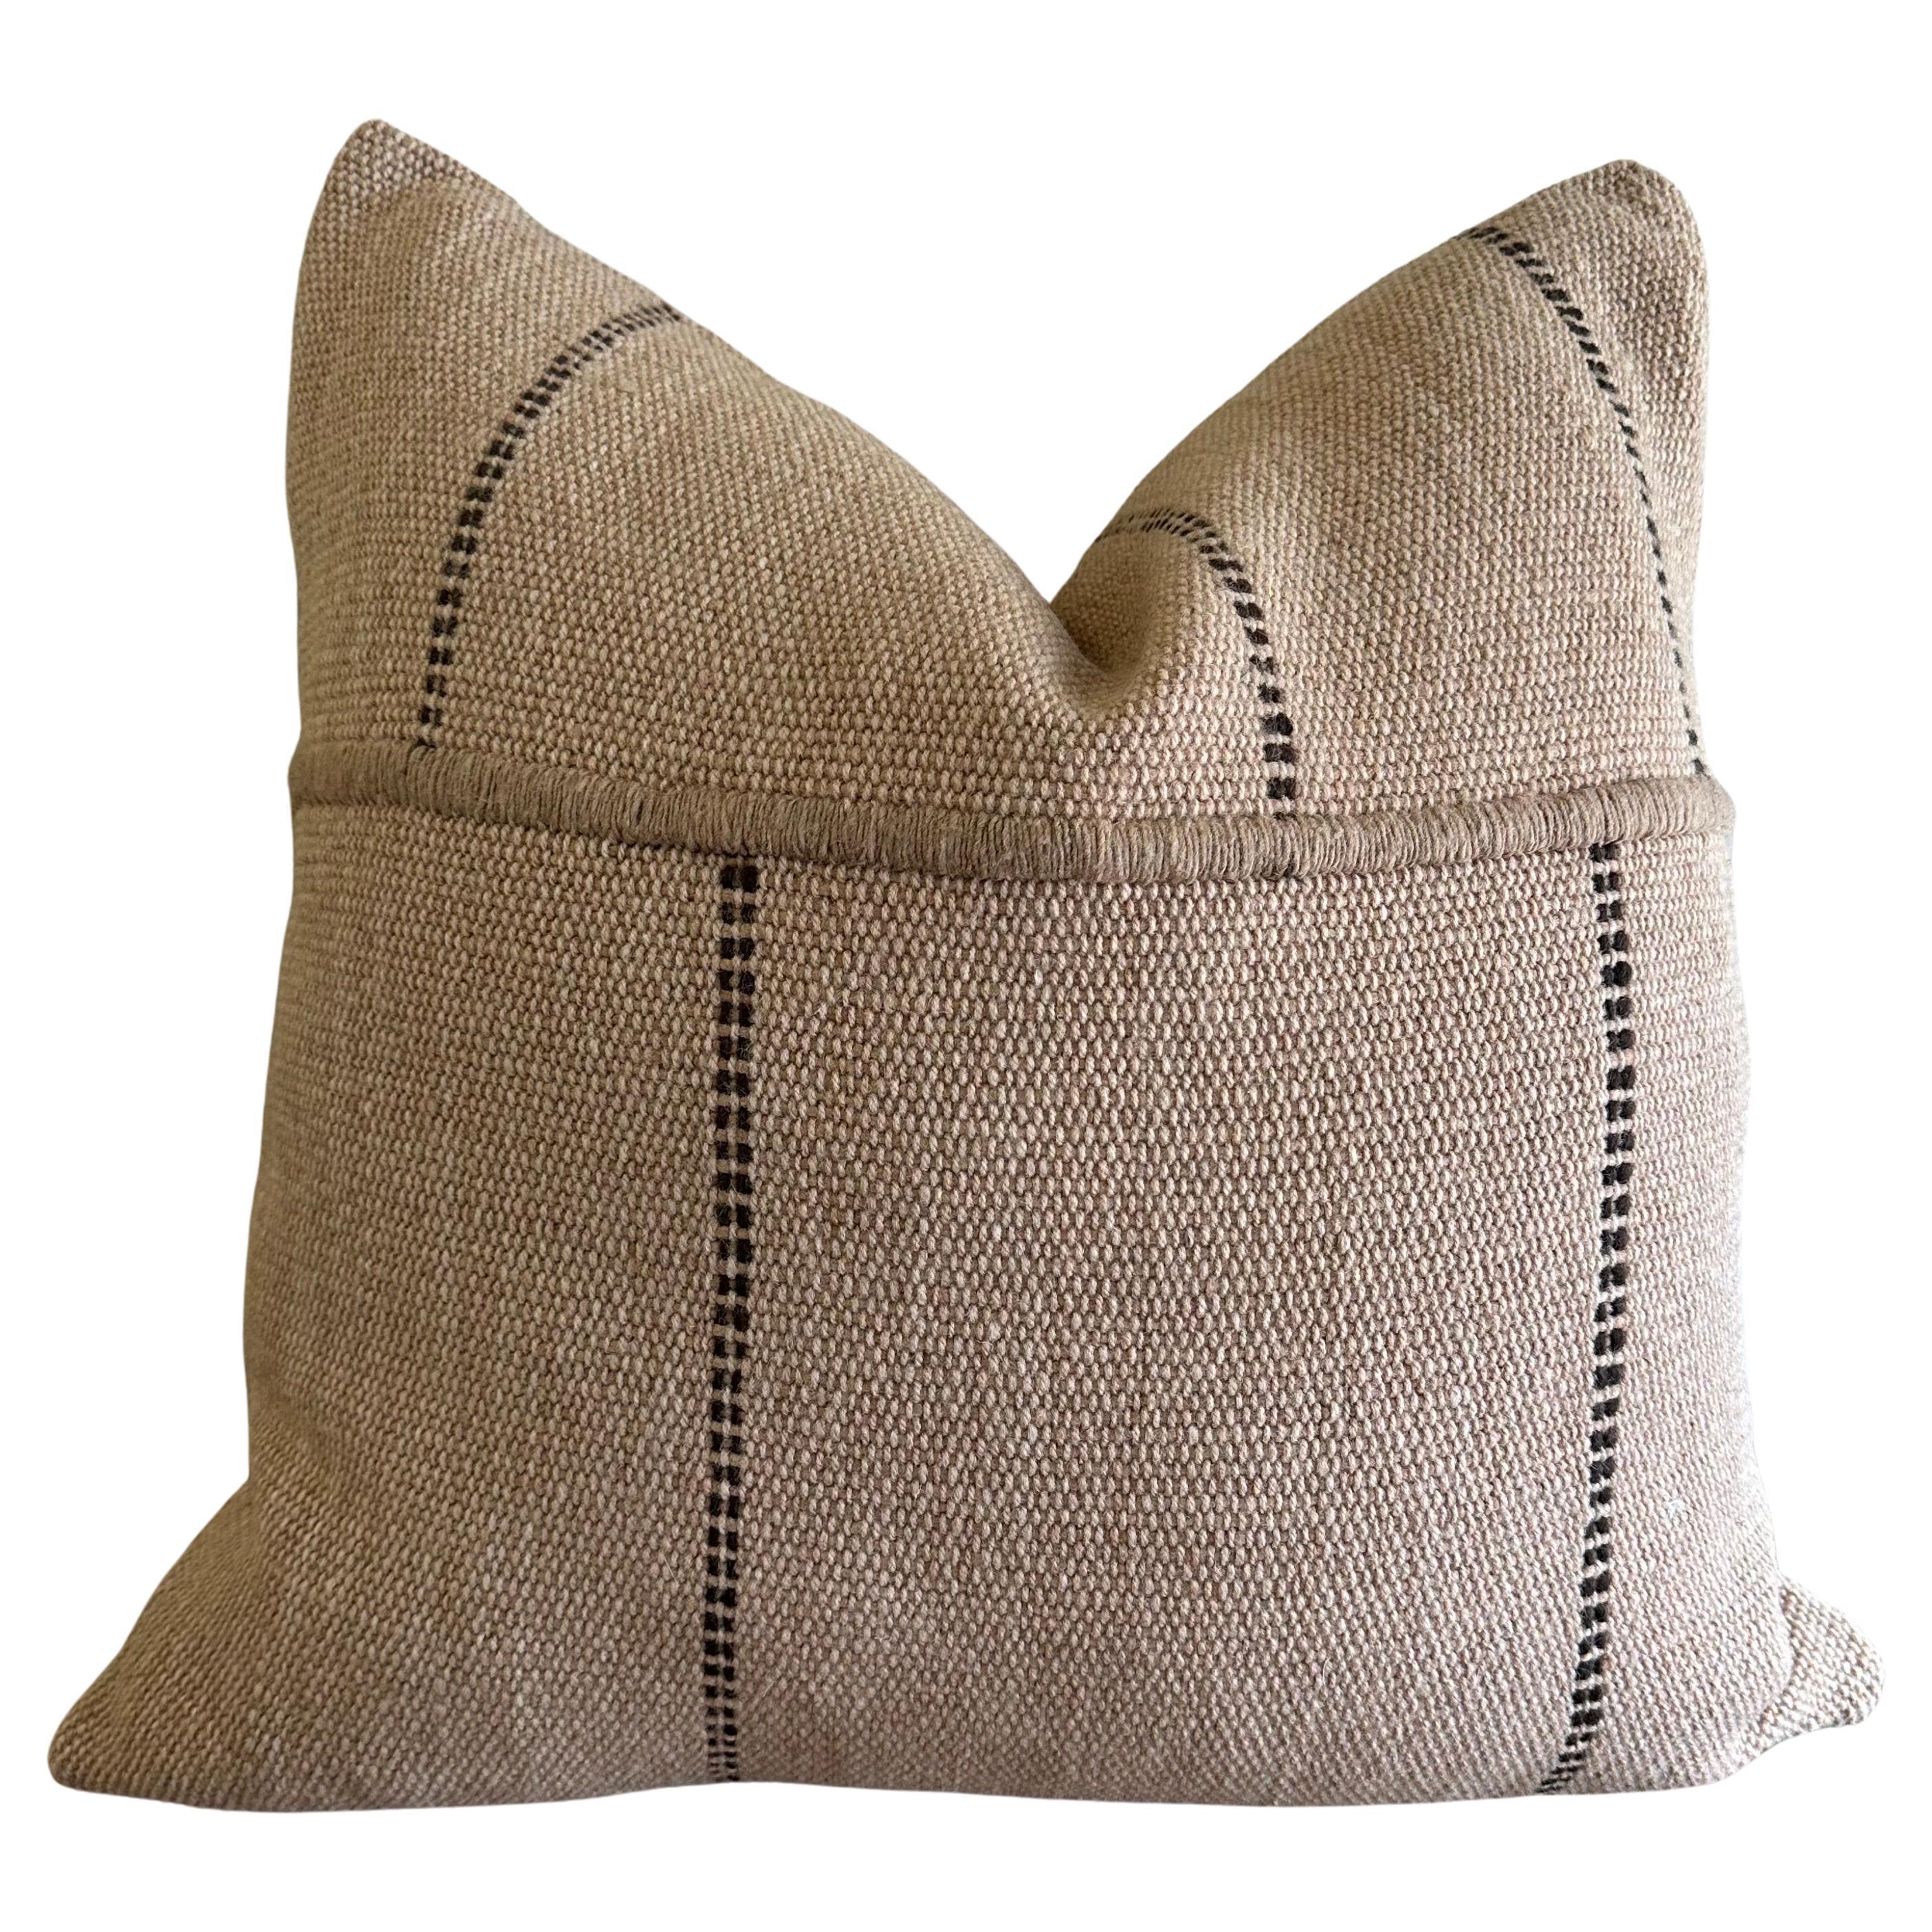 Custom Hand Made Wool Pillow with Stripes Includes Down Feather Insert For Sale